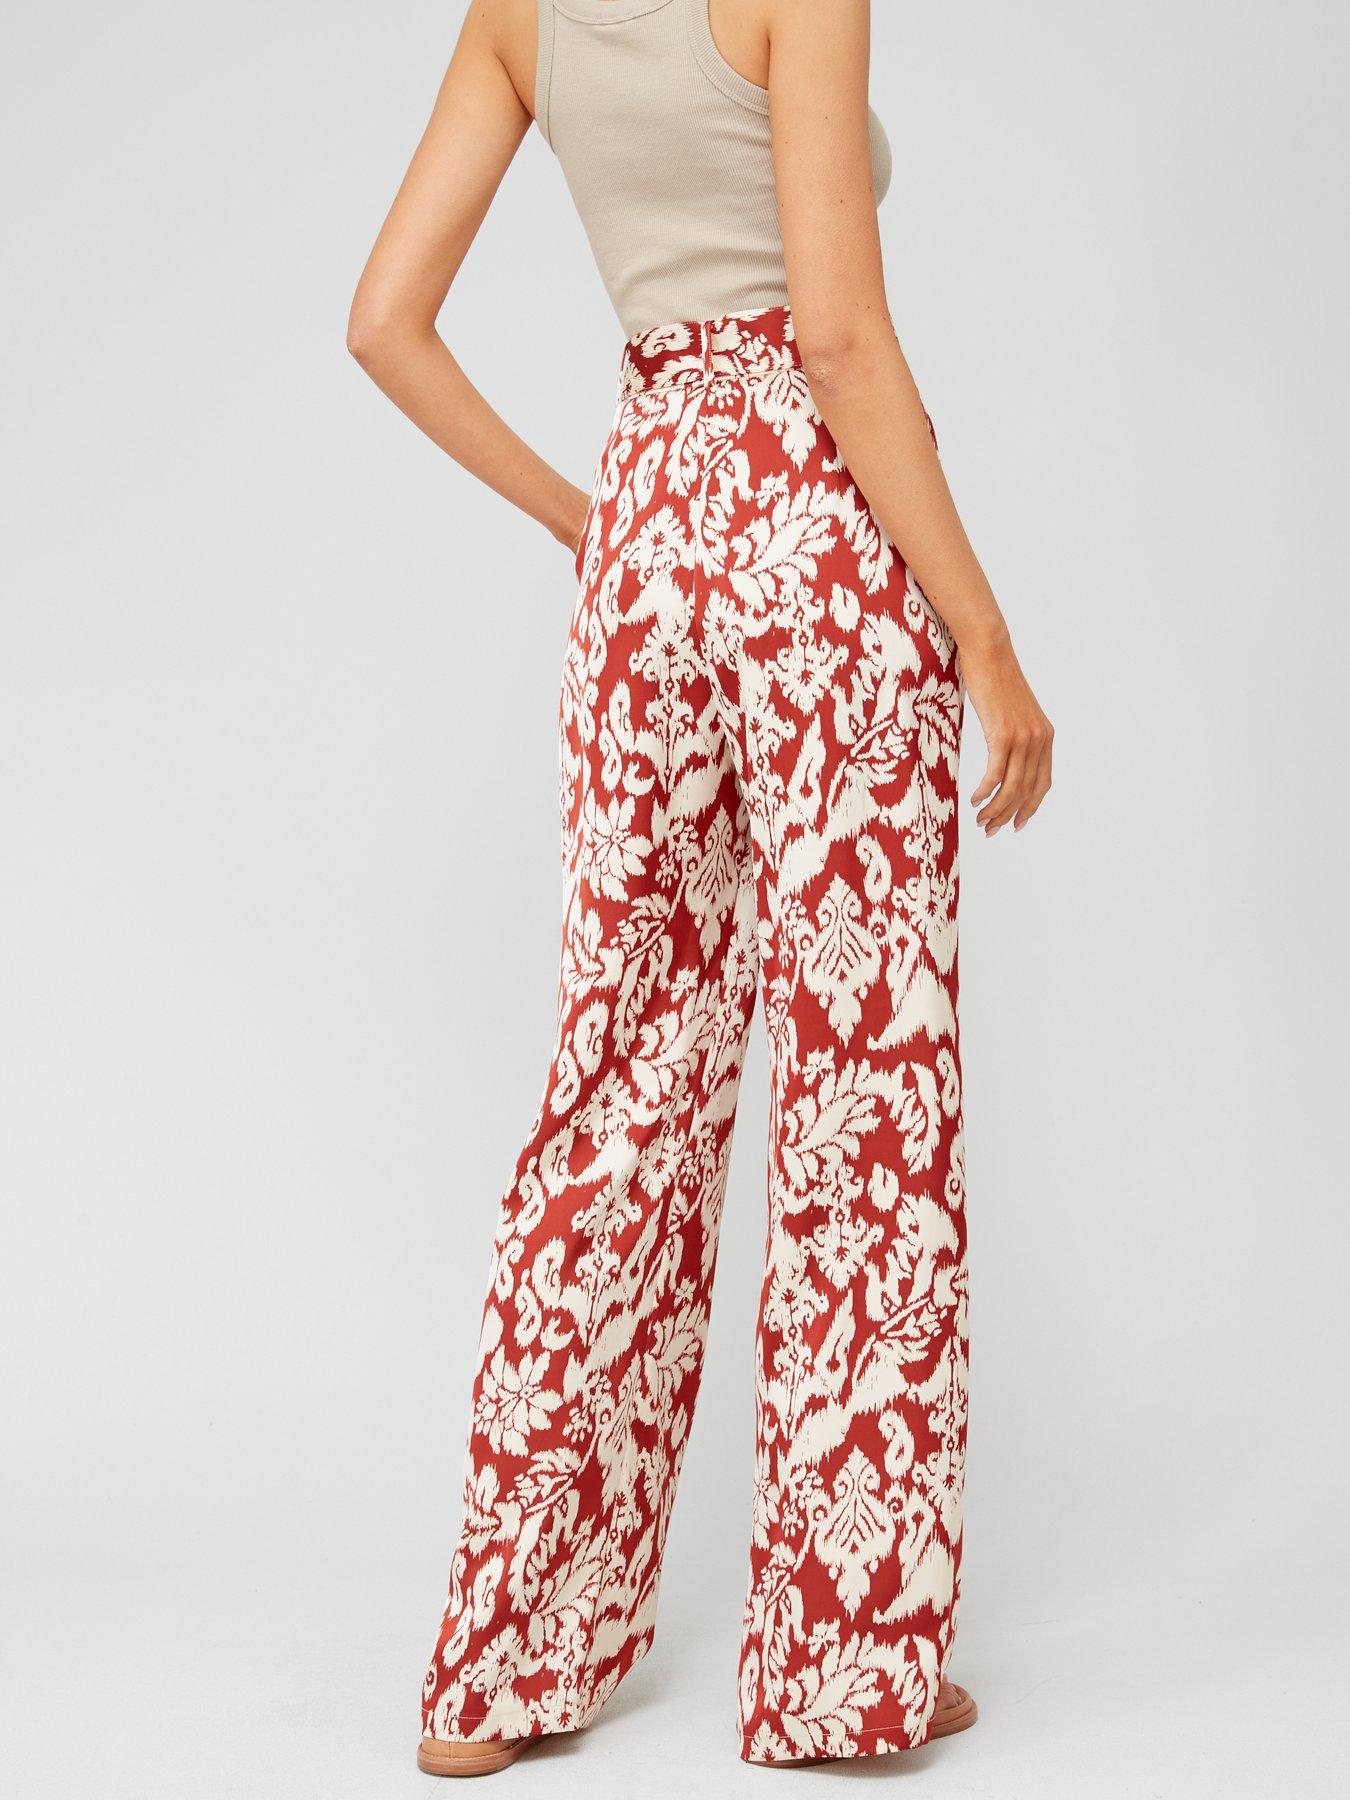 Mango Satin Belted Trousers | very.co.uk